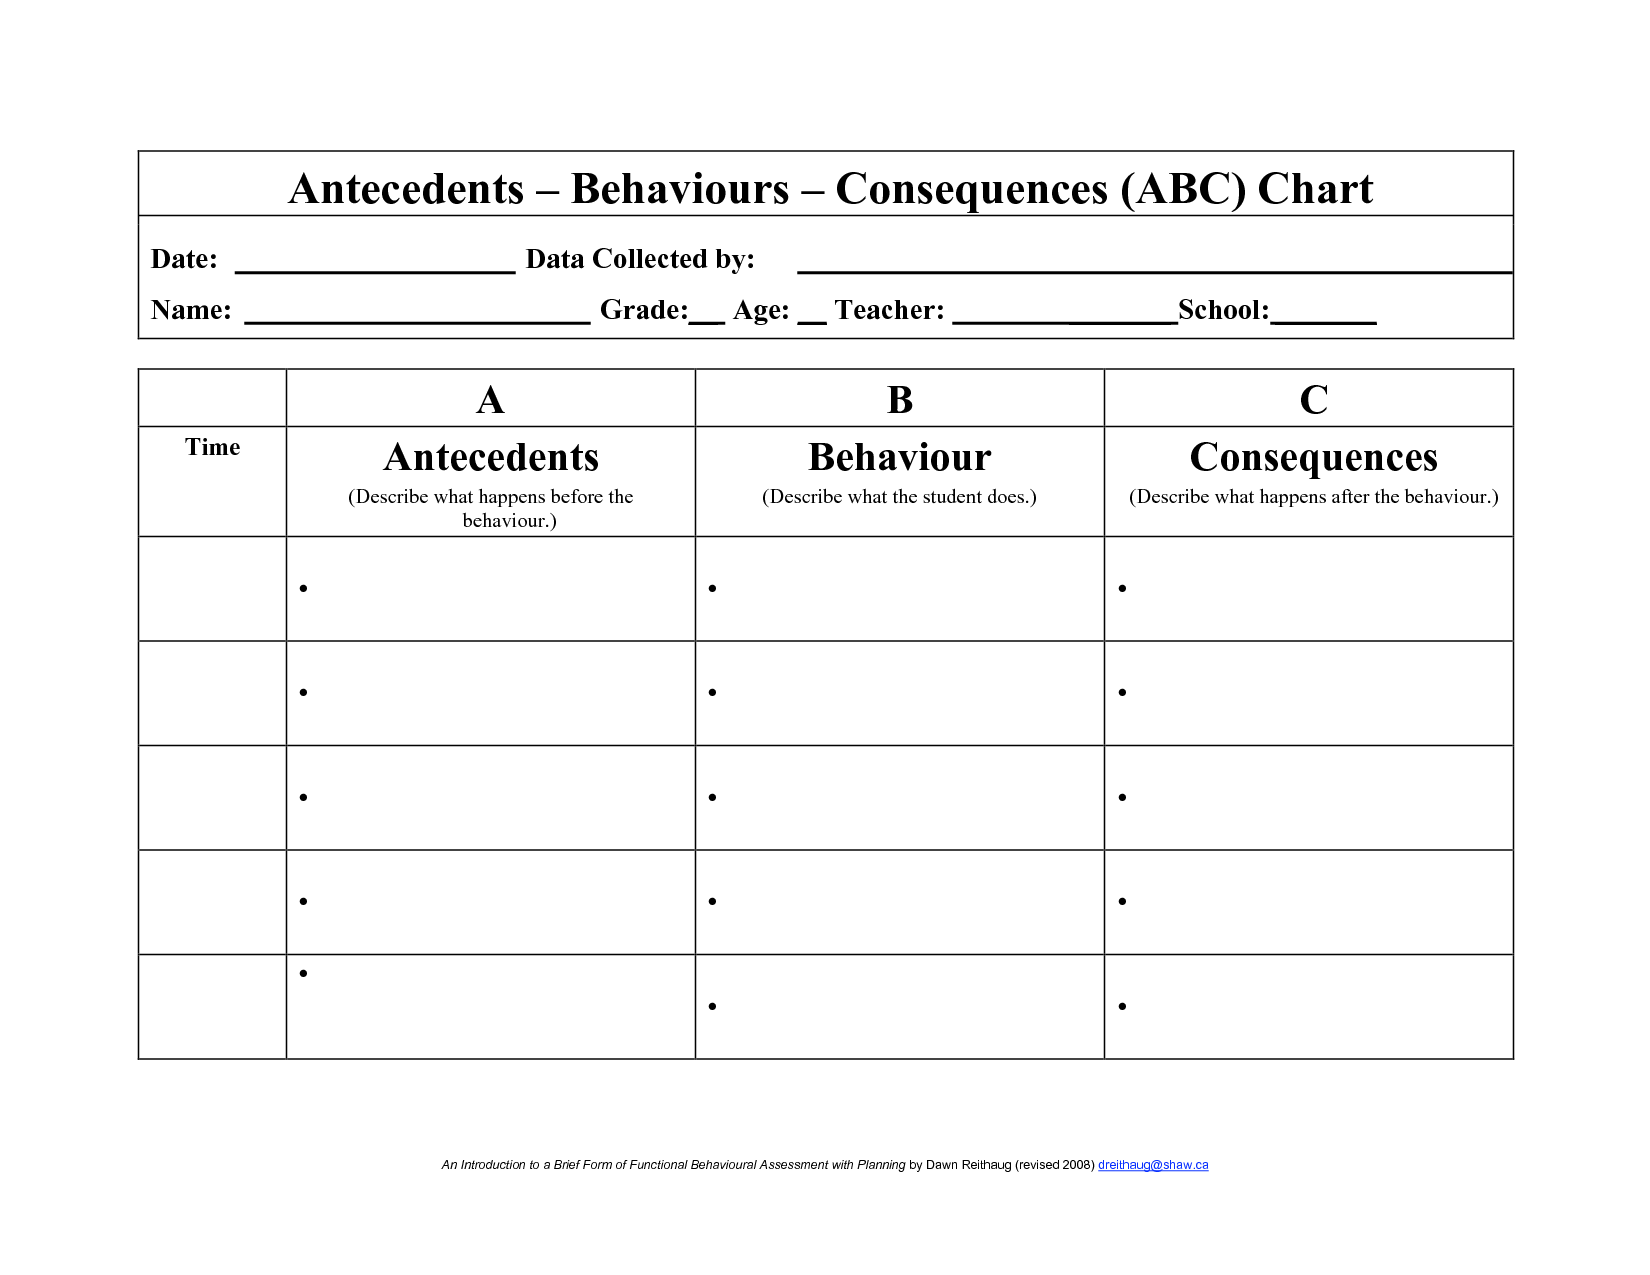 12-best-images-of-personal-data-worksheet-personal-information